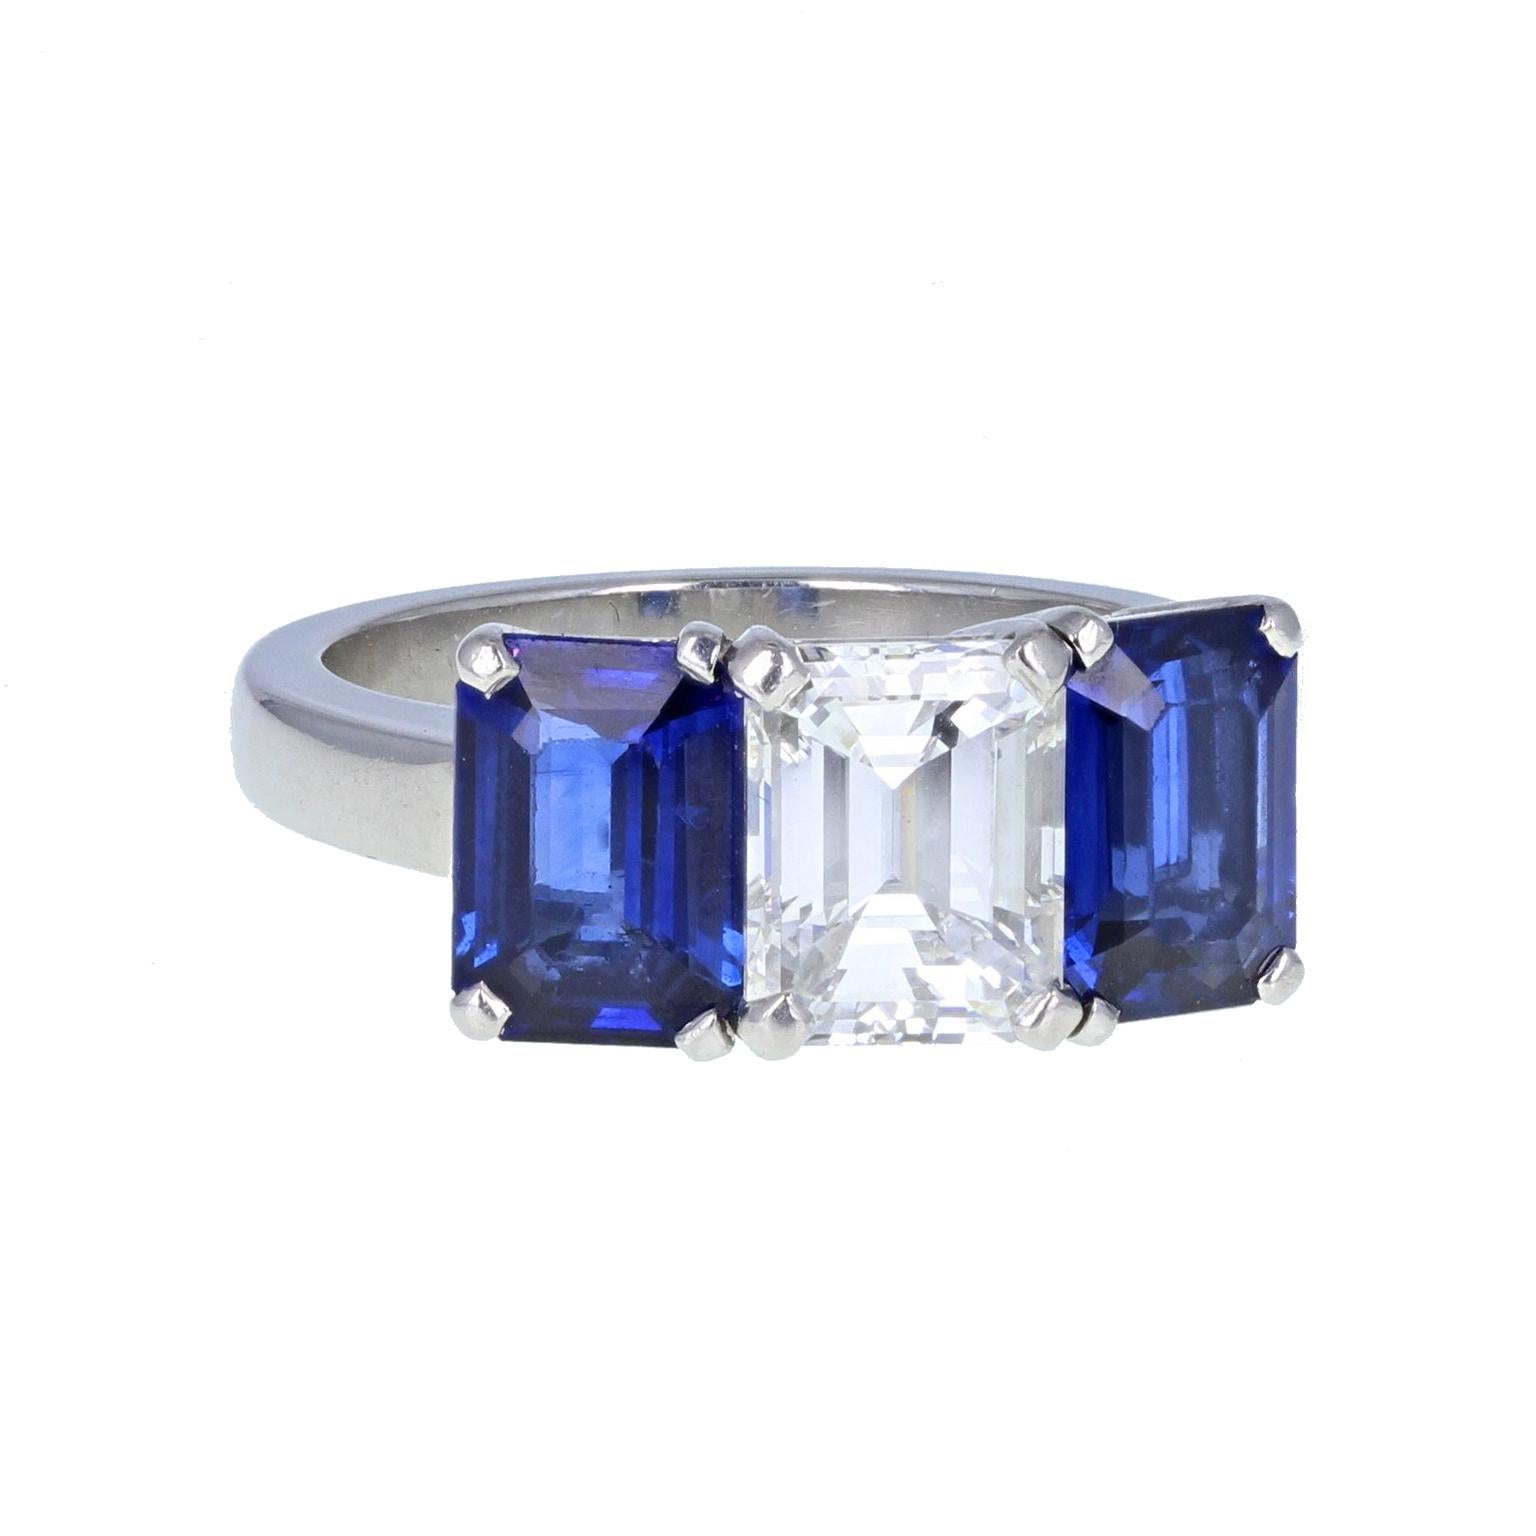 A magnificent blue sapphire and diamond three-stone engagement ring, meticulously well-crafted and exquisitely beautiful  Diamond: 1.60 carats  Diamond Colour: H  Diamond Clarity: VS  Setting: Mounted in four platinum claws and a heavy, squared